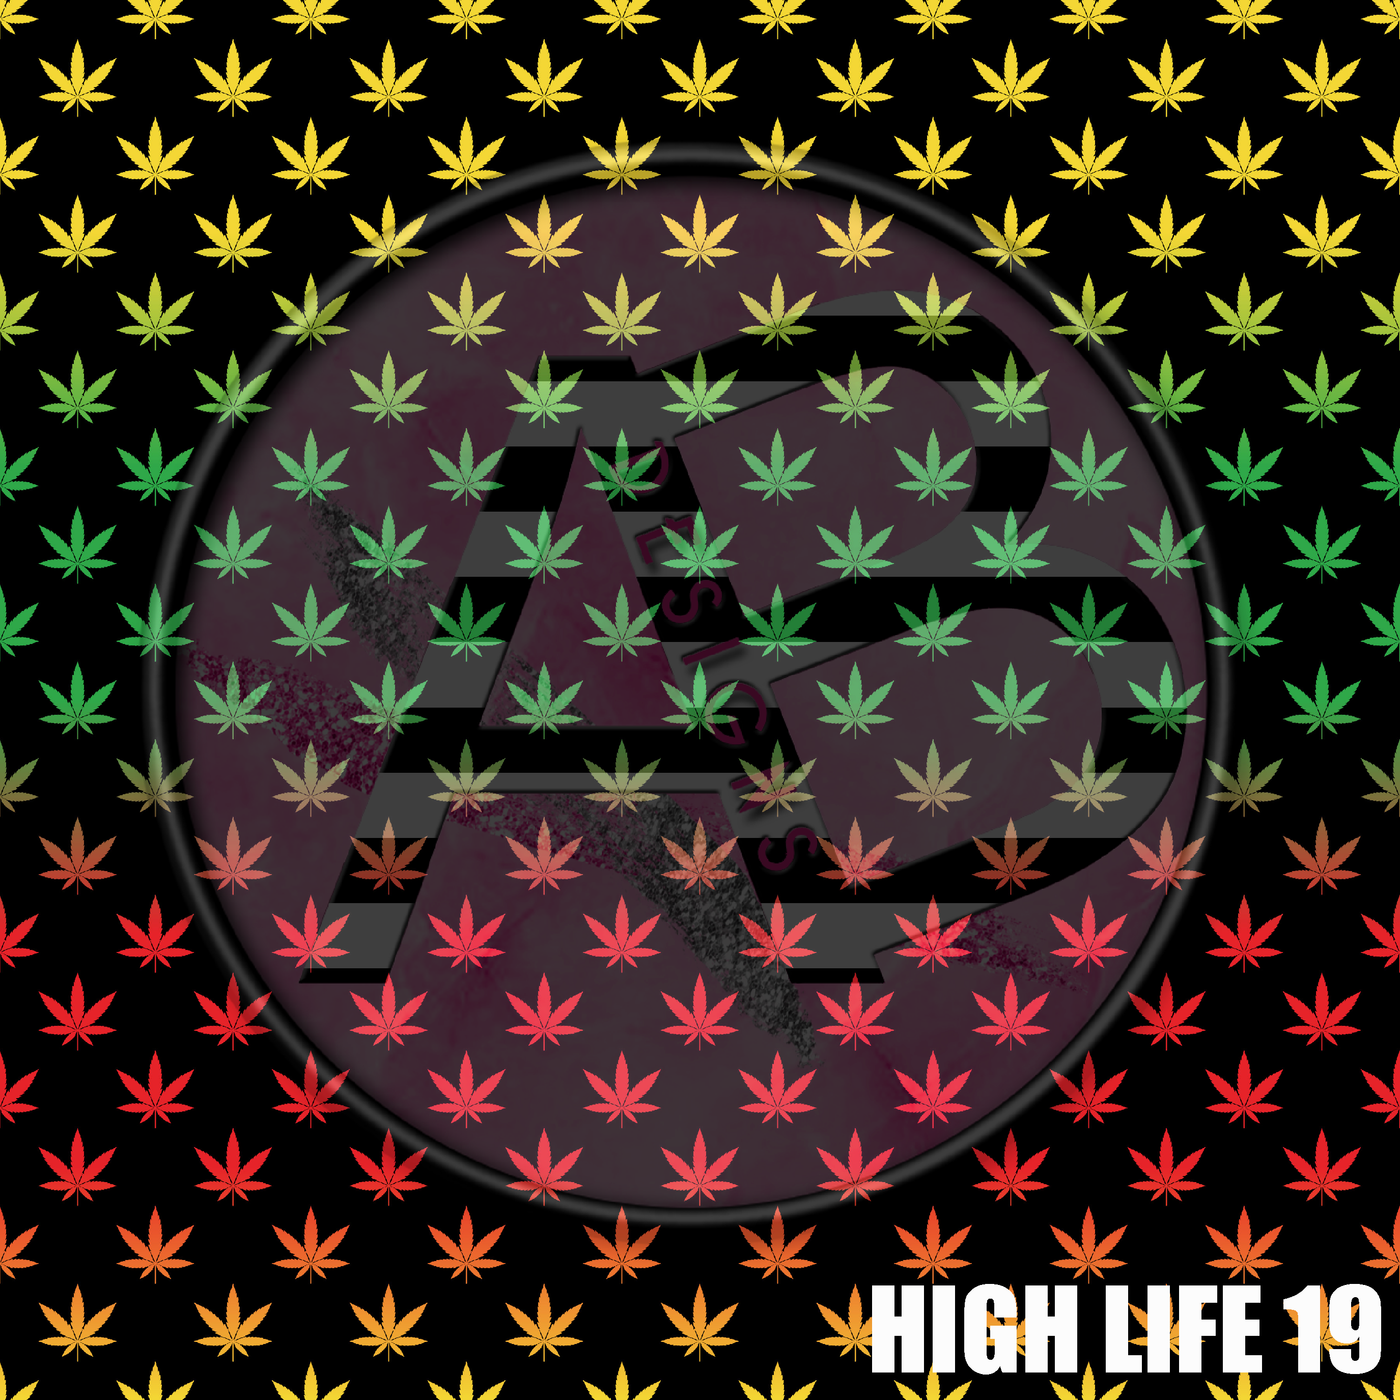 Adhesive Patterned Vinyl - High Life 19